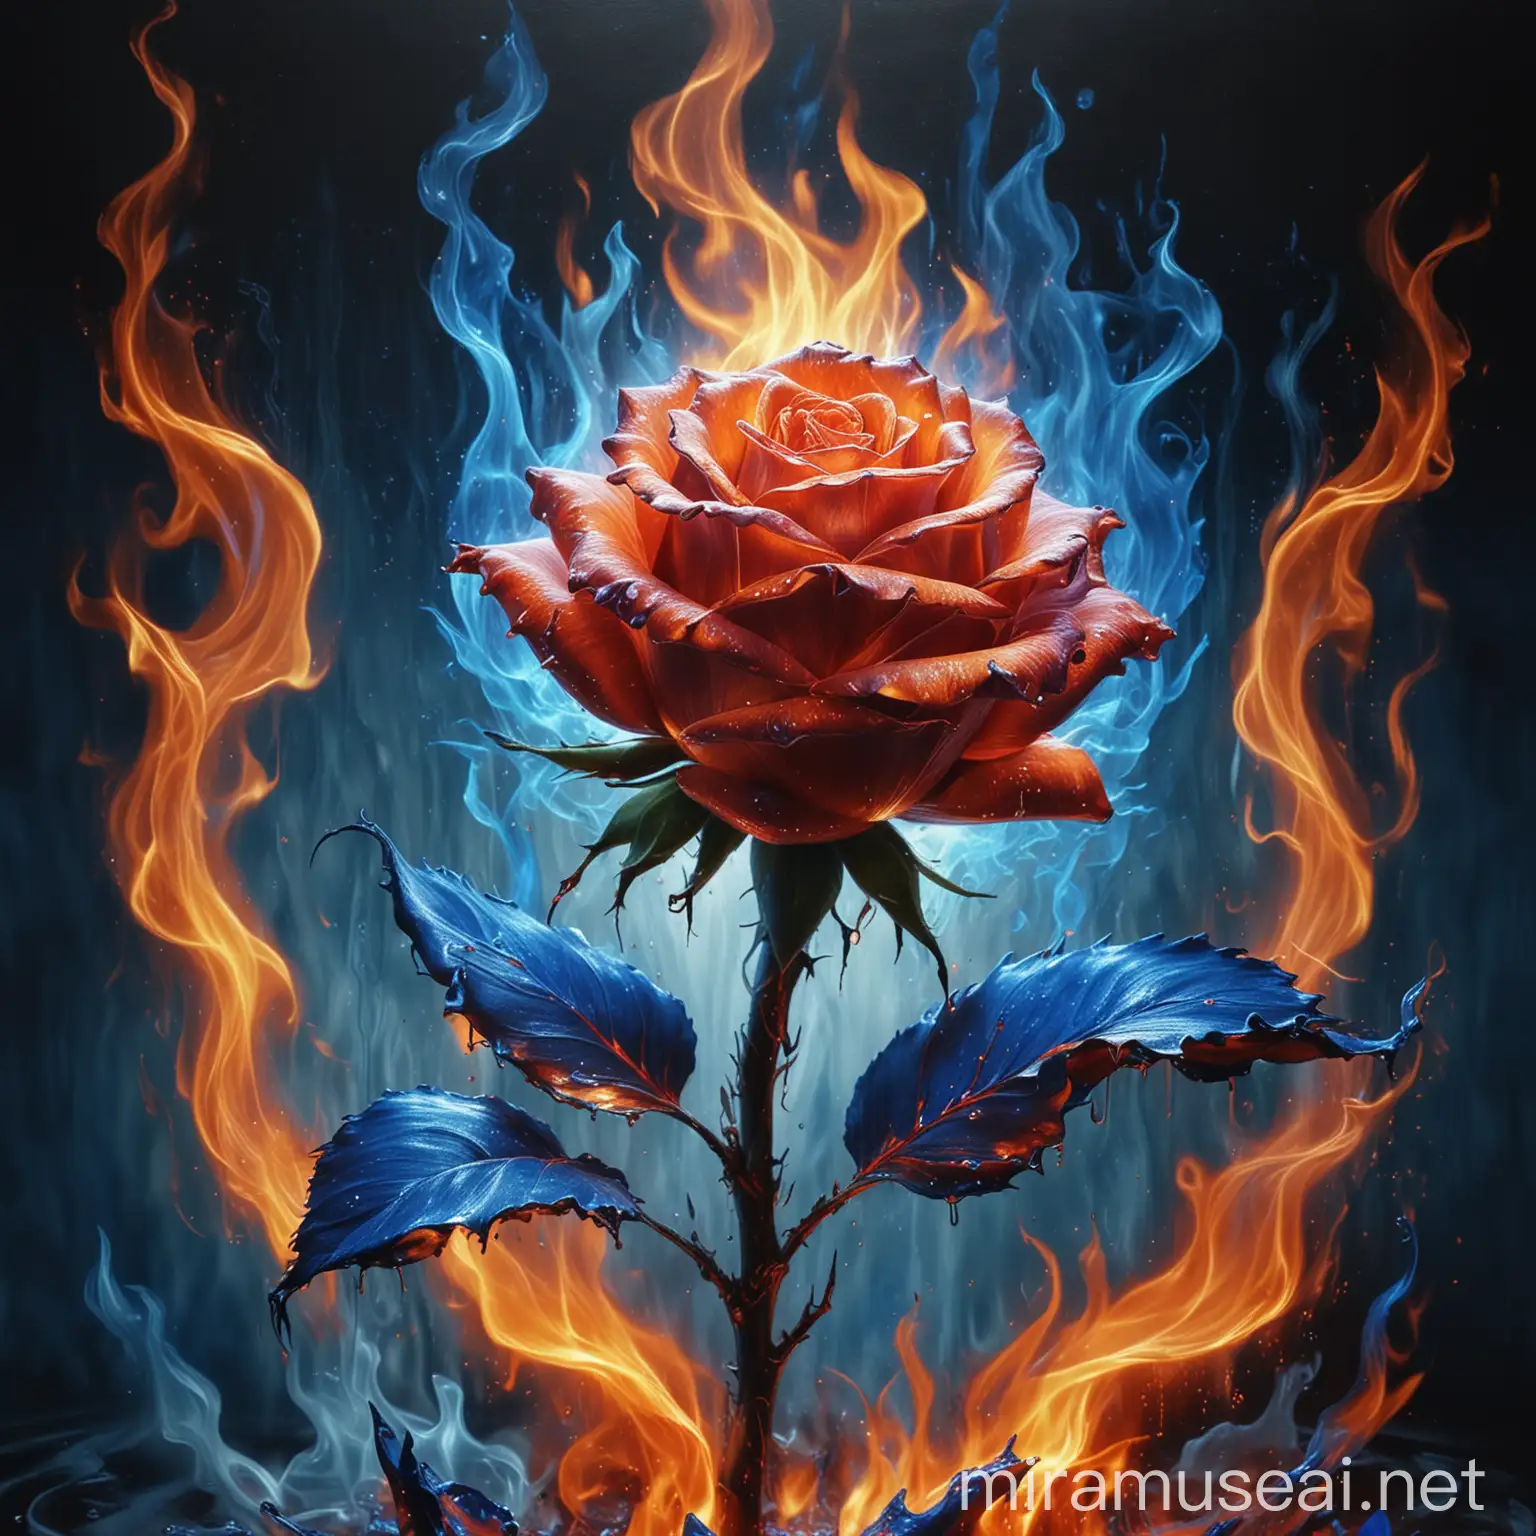 a rose on fire with blue flames in a metallic environment